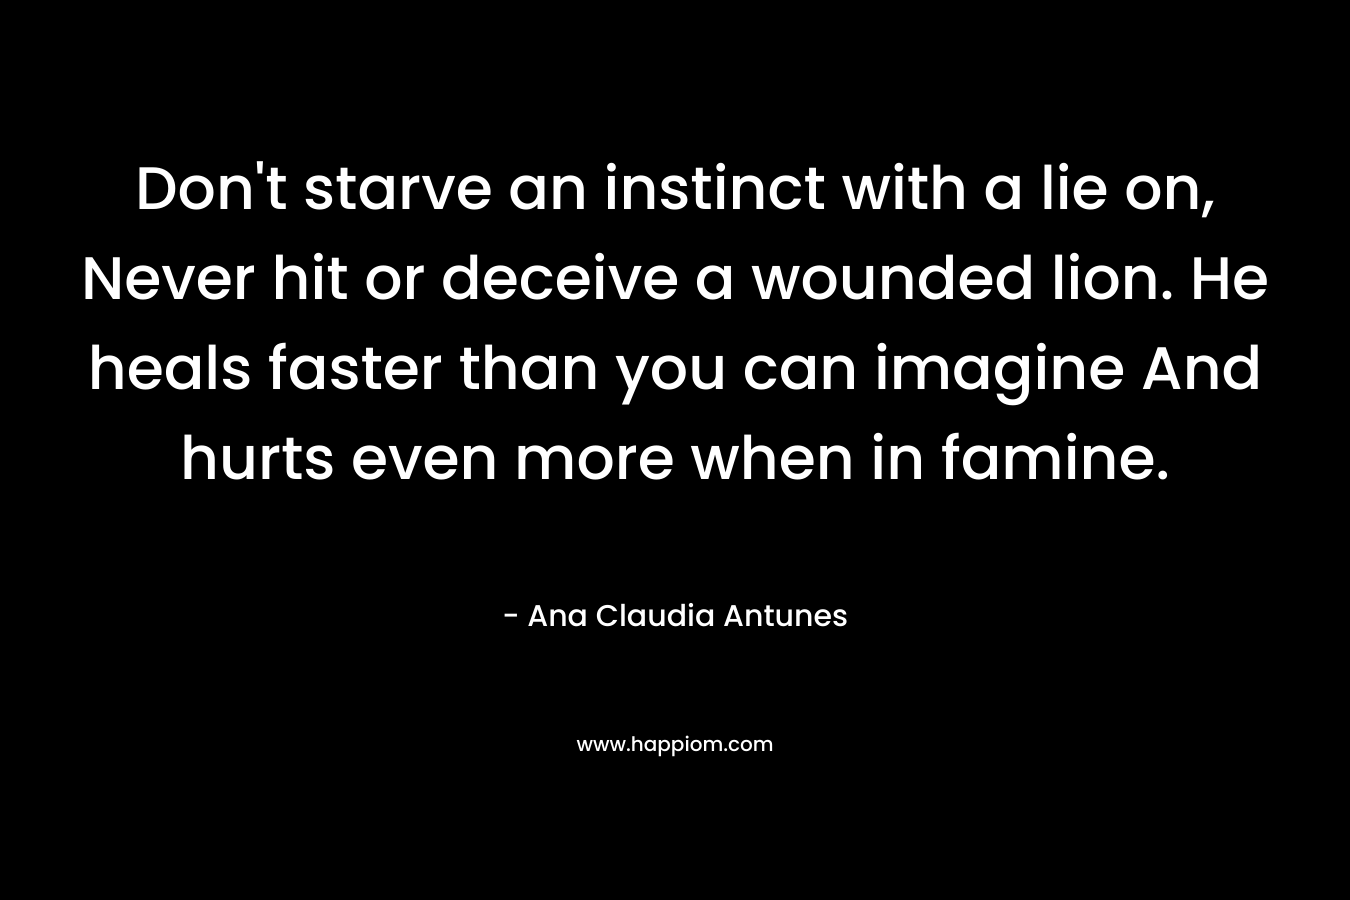 Don't starve an instinct with a lie on, Never hit or deceive a wounded lion. He heals faster than you can imagine And hurts even more when in famine.